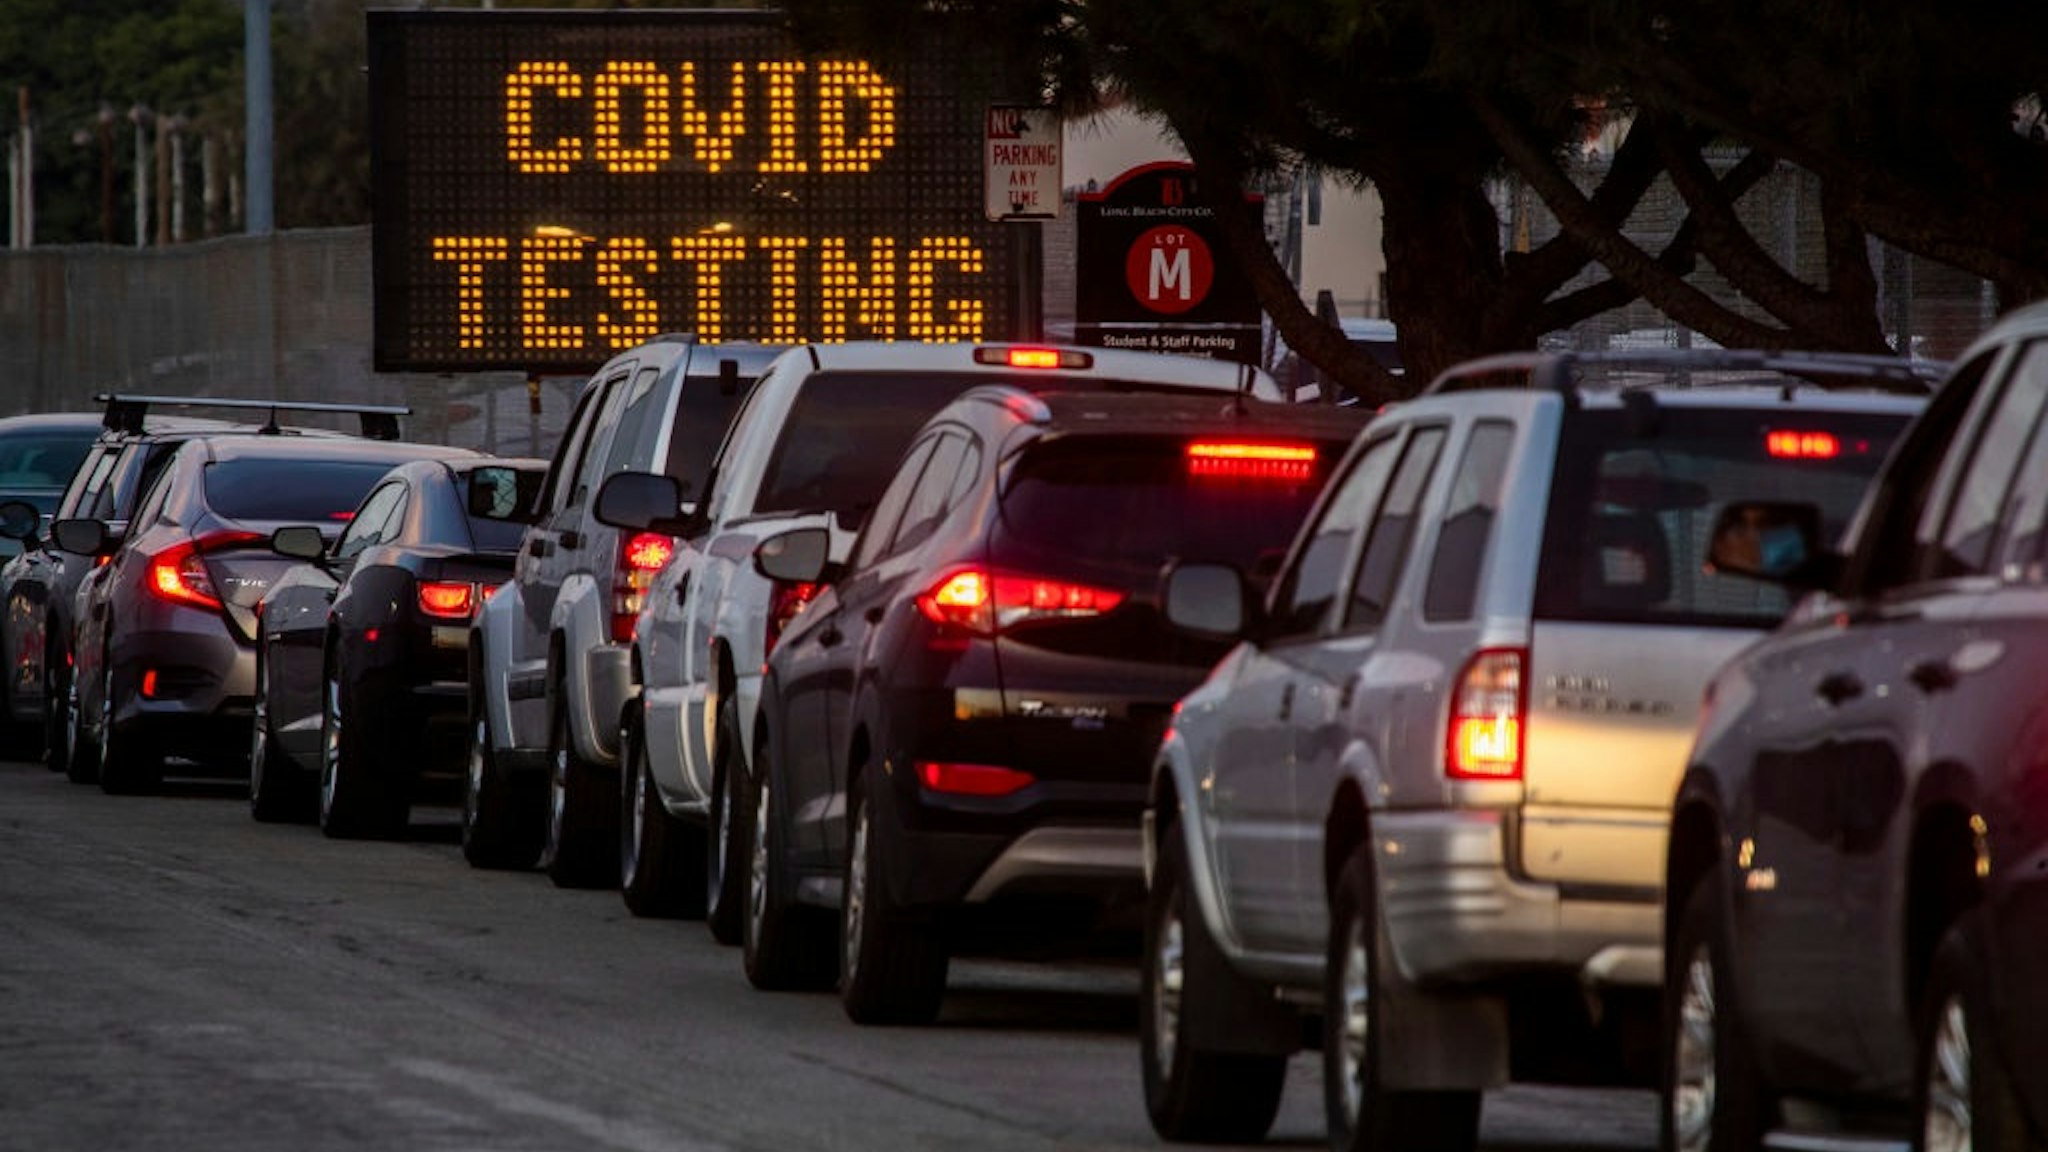 LONG BEACH, CA - December 09: A long line of vehicles line up to take COVID-19 tests at dusk at Long Beach City College-Veterans Memorial Stadium on Wednesday, Dec. 9, 2020 in Long Beach, CA.